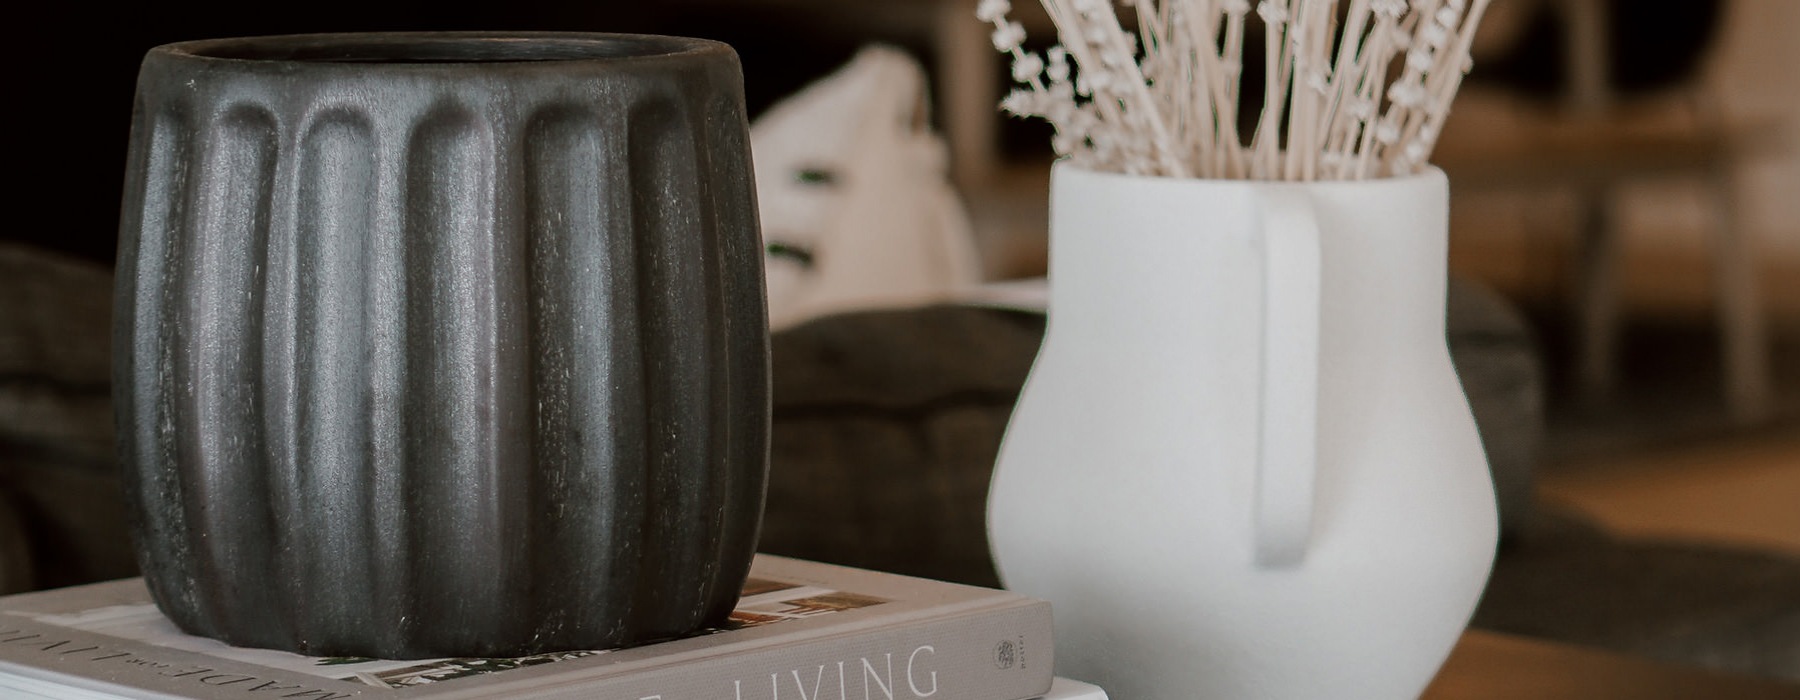 vases and books decorate coffee table